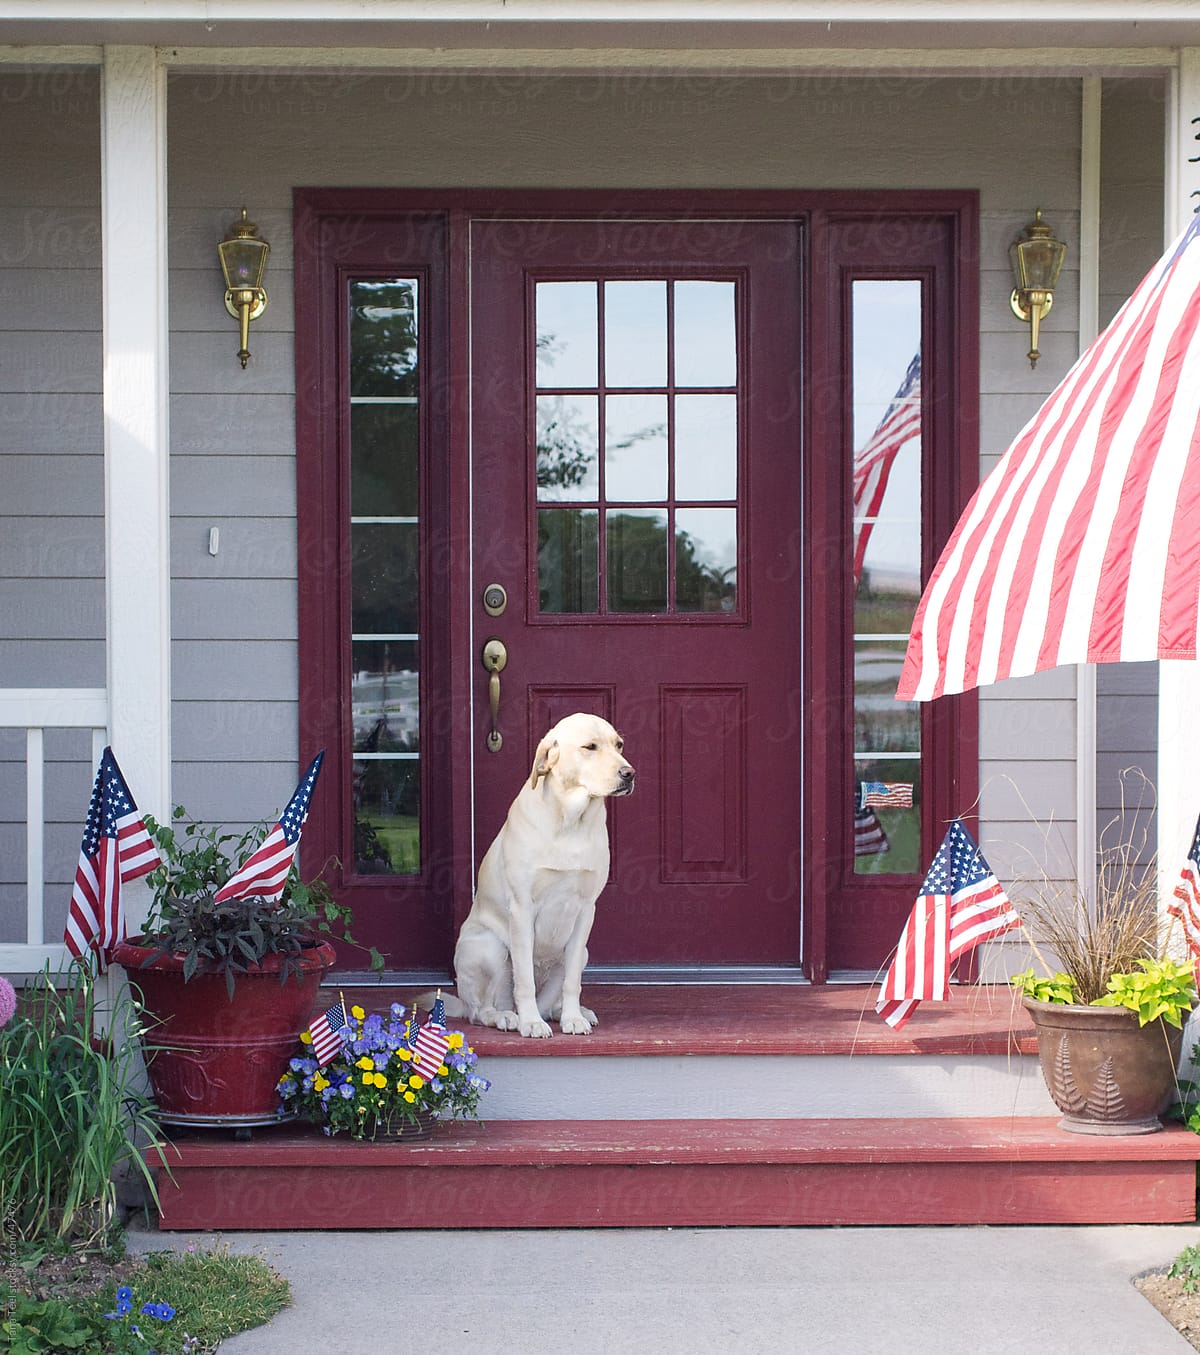 Golden lab sitting on porch decorated for 4th of July